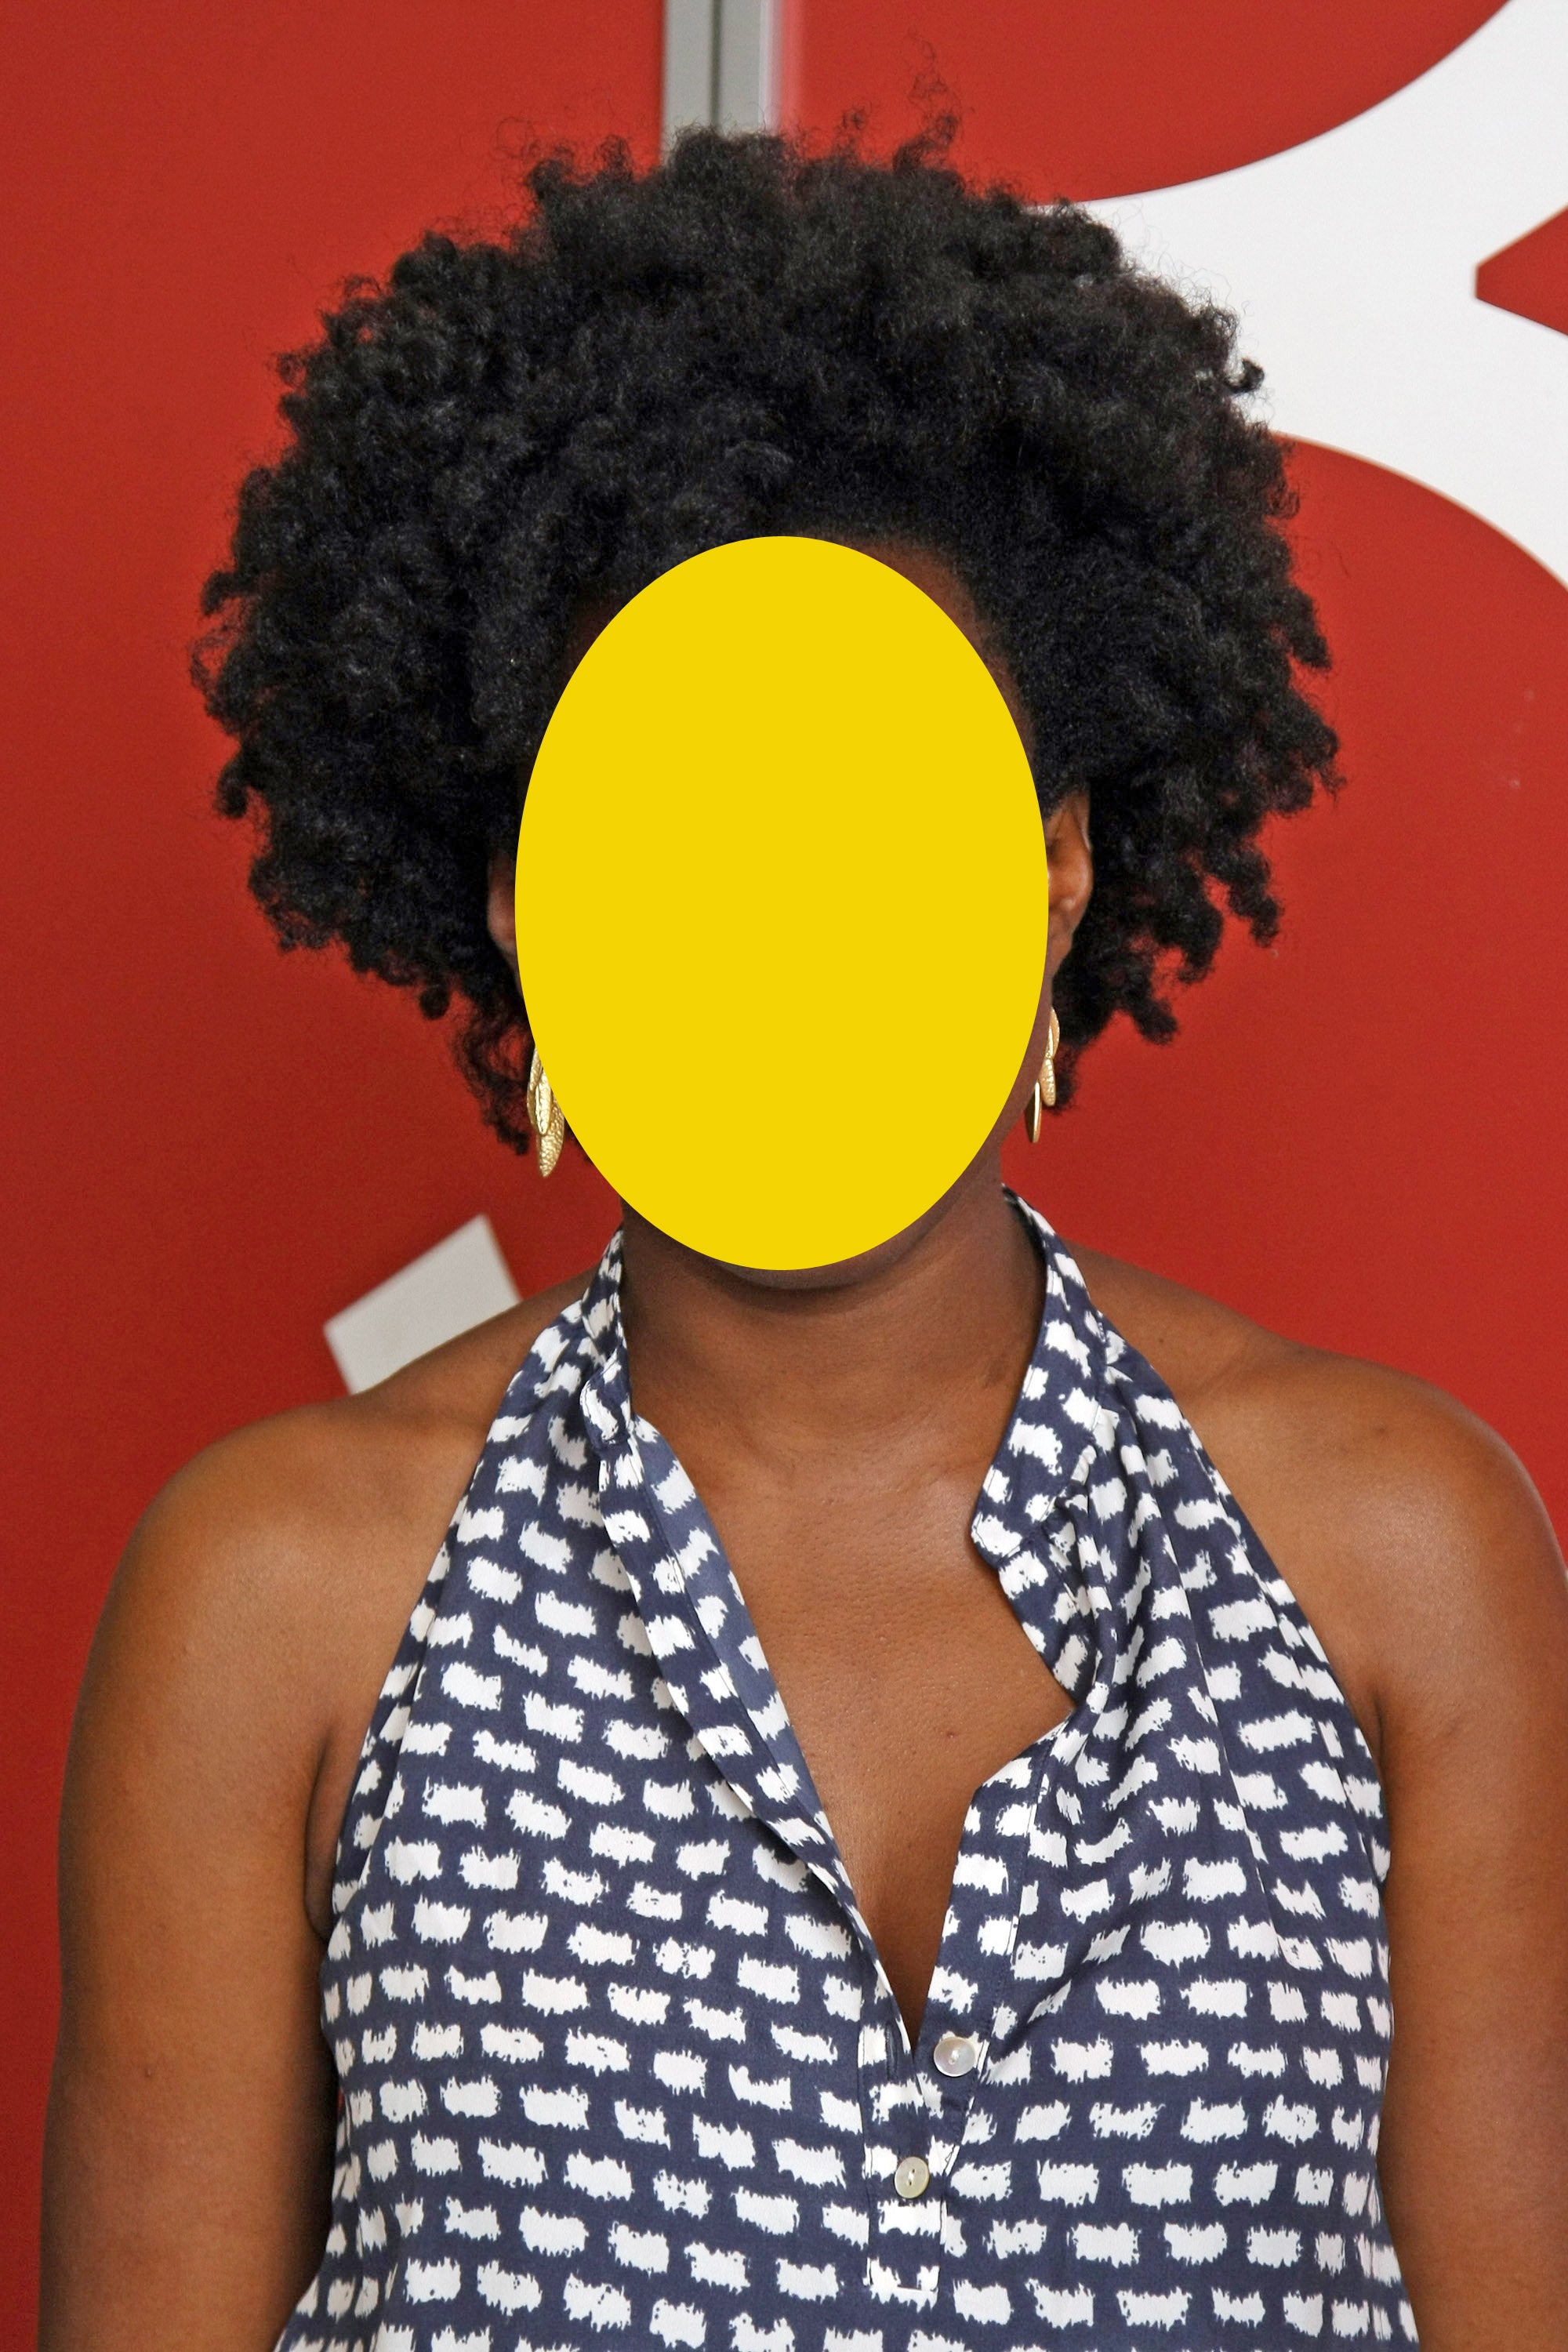 Guess the Naturalista